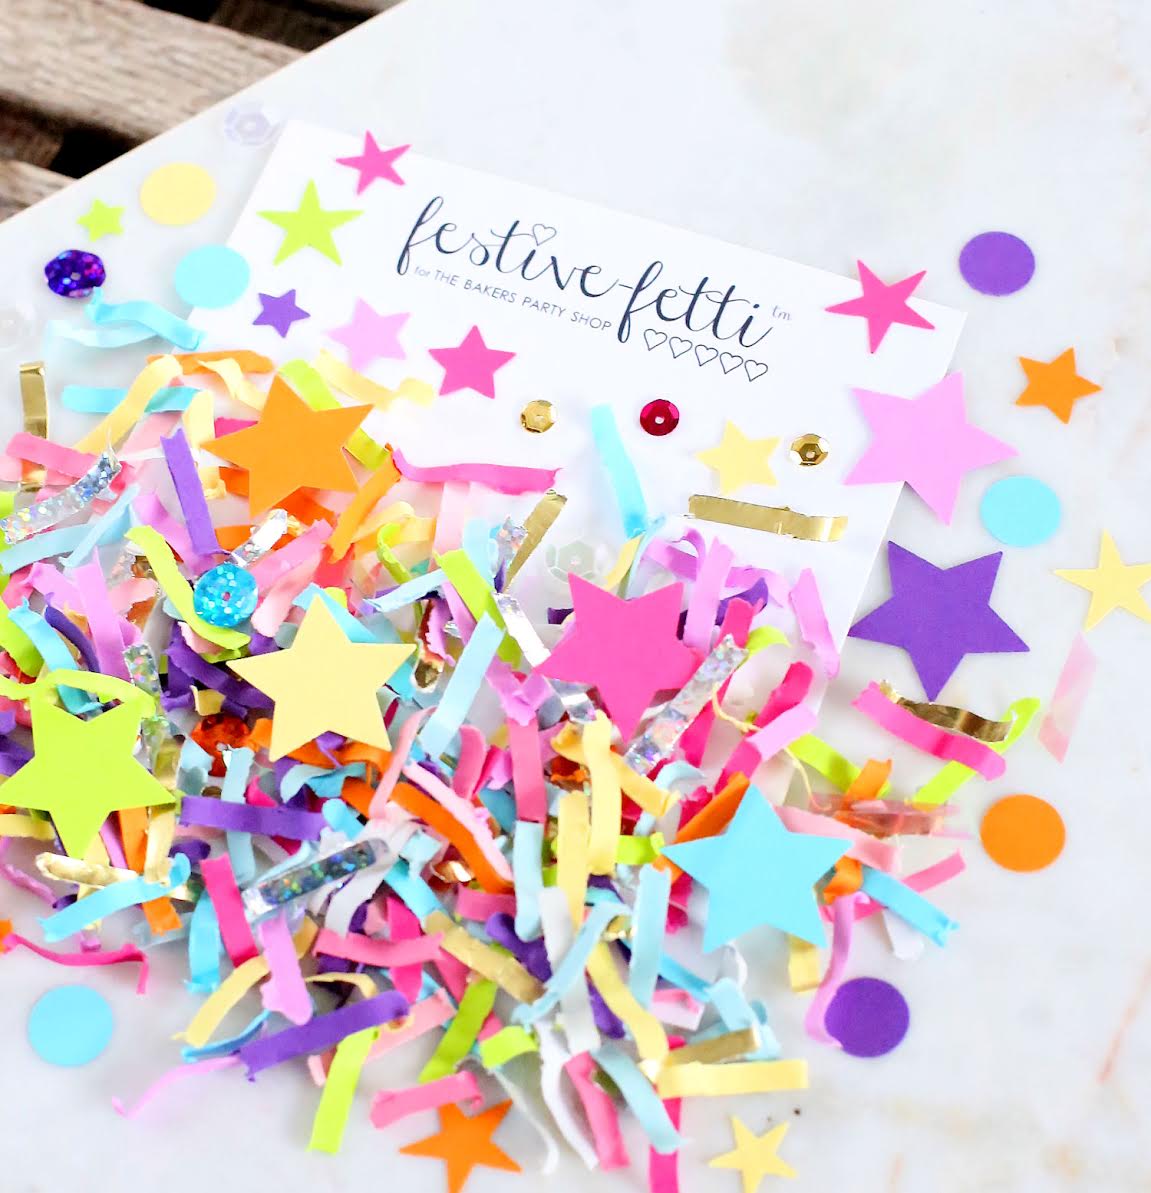  Colorful Unicorn Must-Have Party Items for a Perfectly Styled Unicorn Theme Dessert Table - Unicorn Festive Fetti Confetti with Stars - from The Bakers Party Shop - see more on www.GiggleHearts.com 